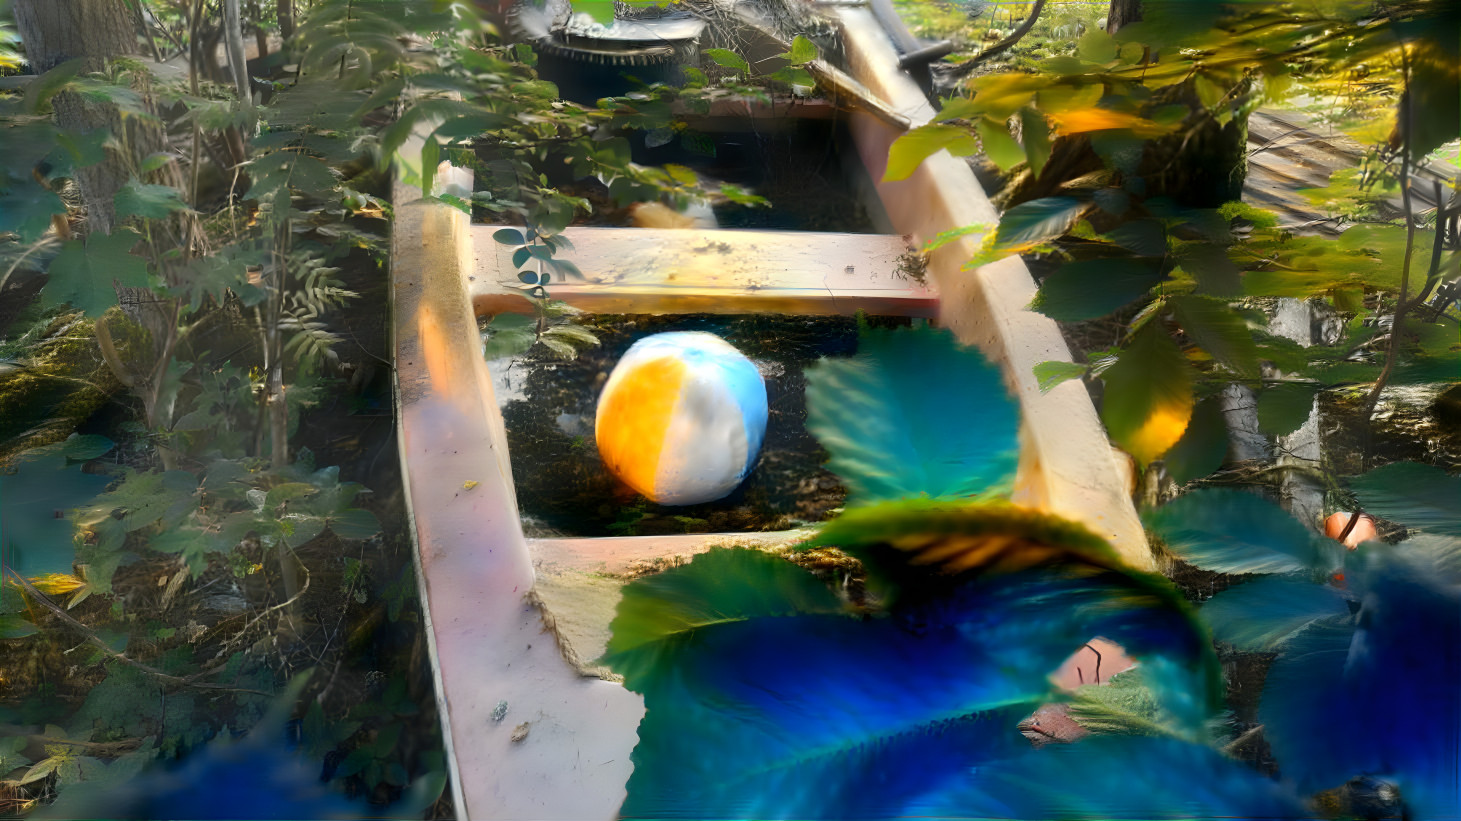 Beach ball in a abandoned boat